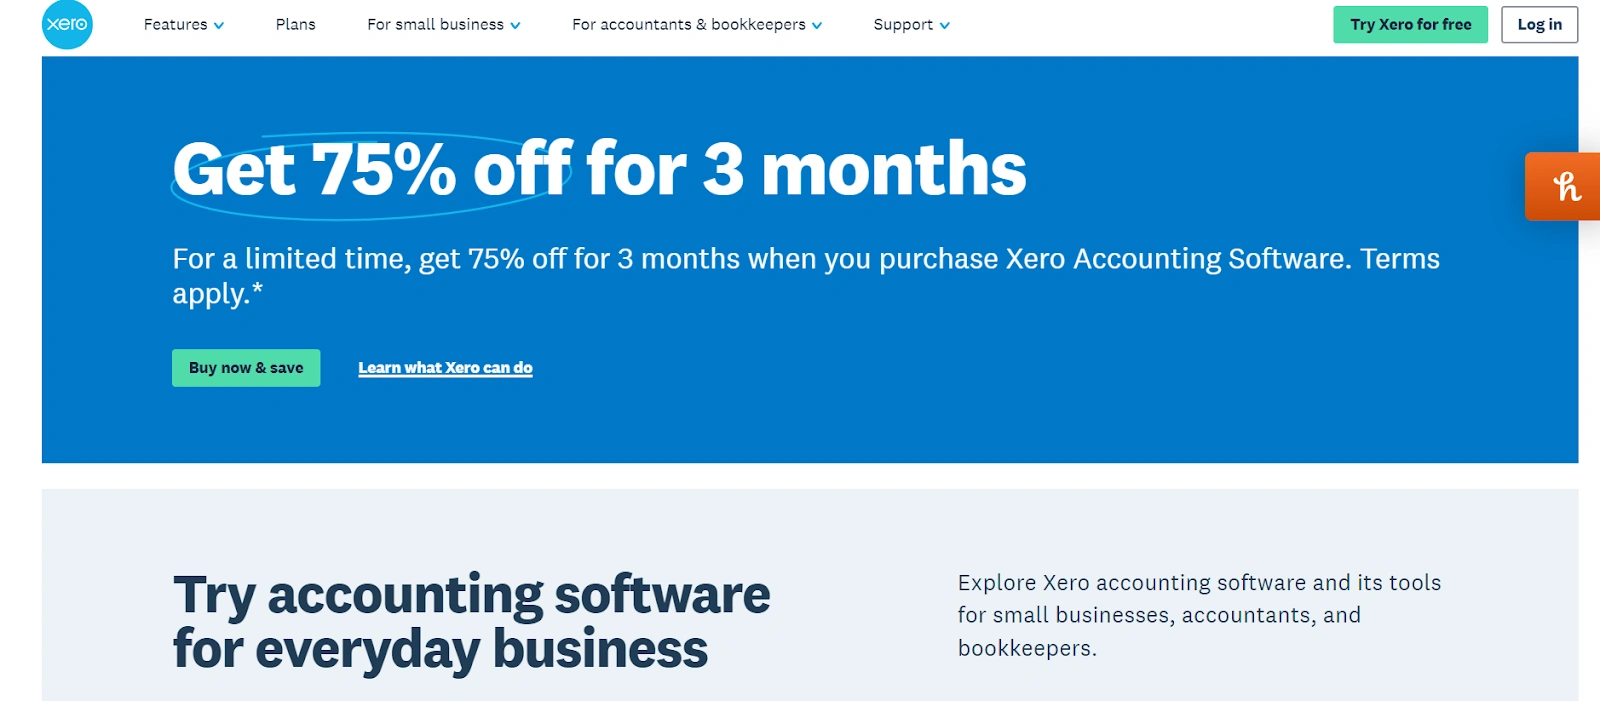 Xero - Best accounting software for business growth